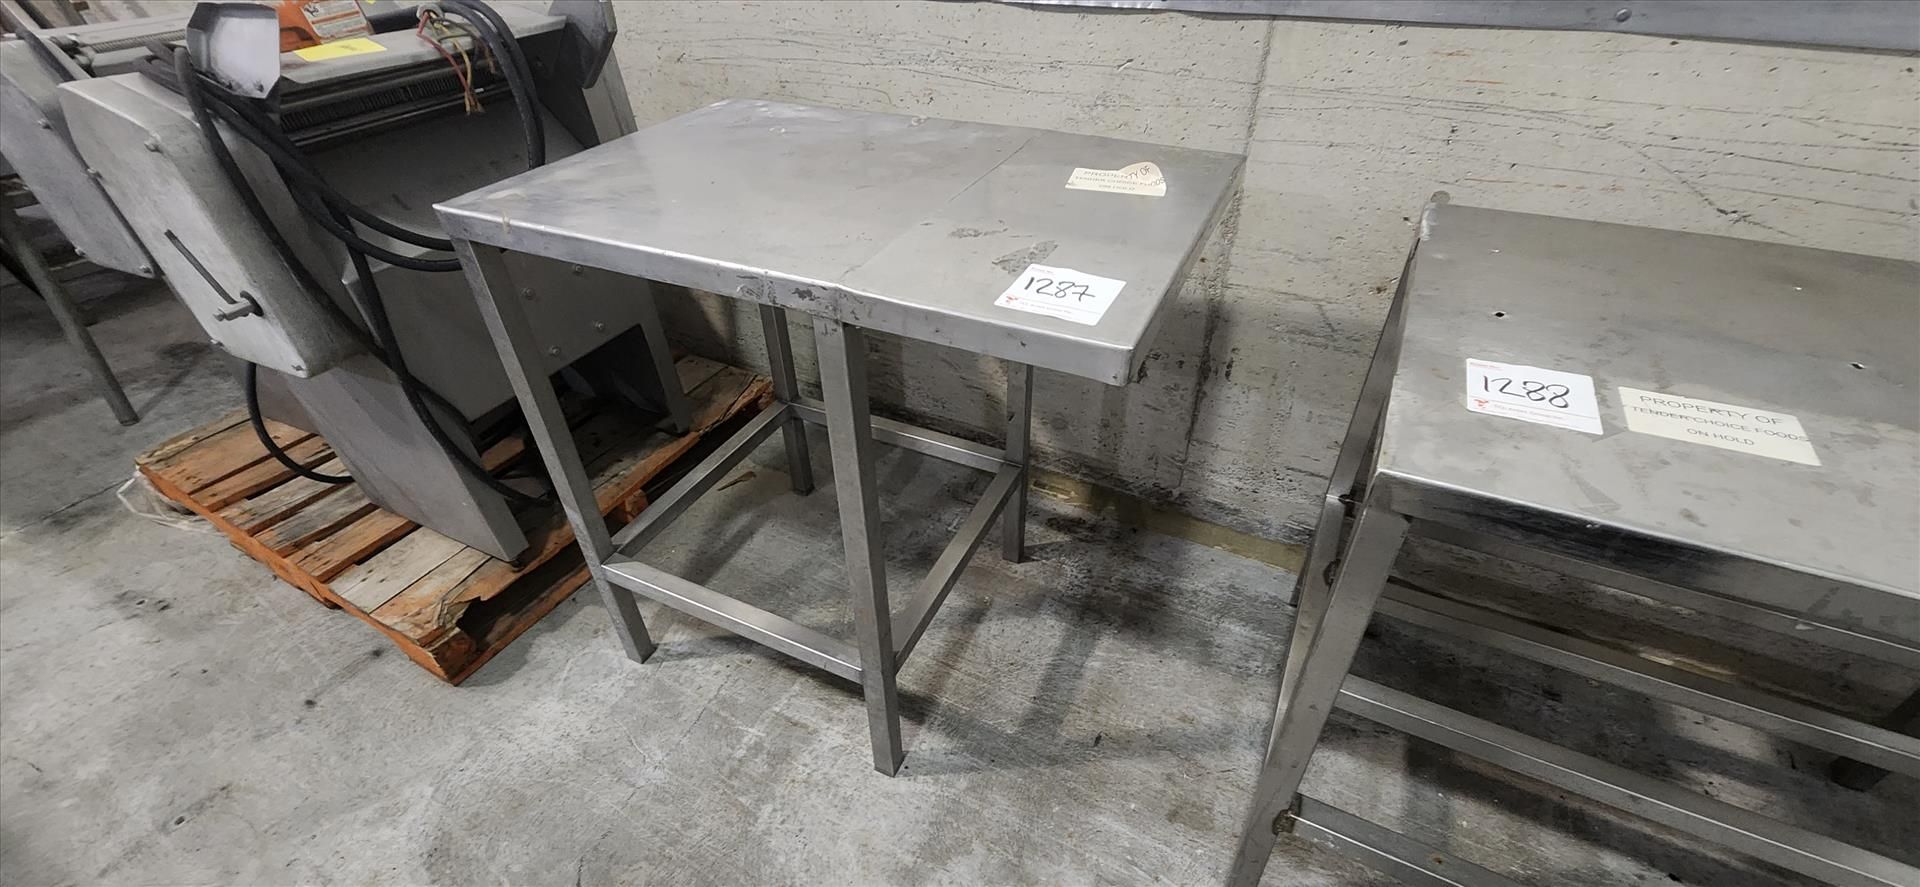 table, stainless steel, approx. 24 in. x 36 in. [TAG 1287 - LOC Brockley Dr.]